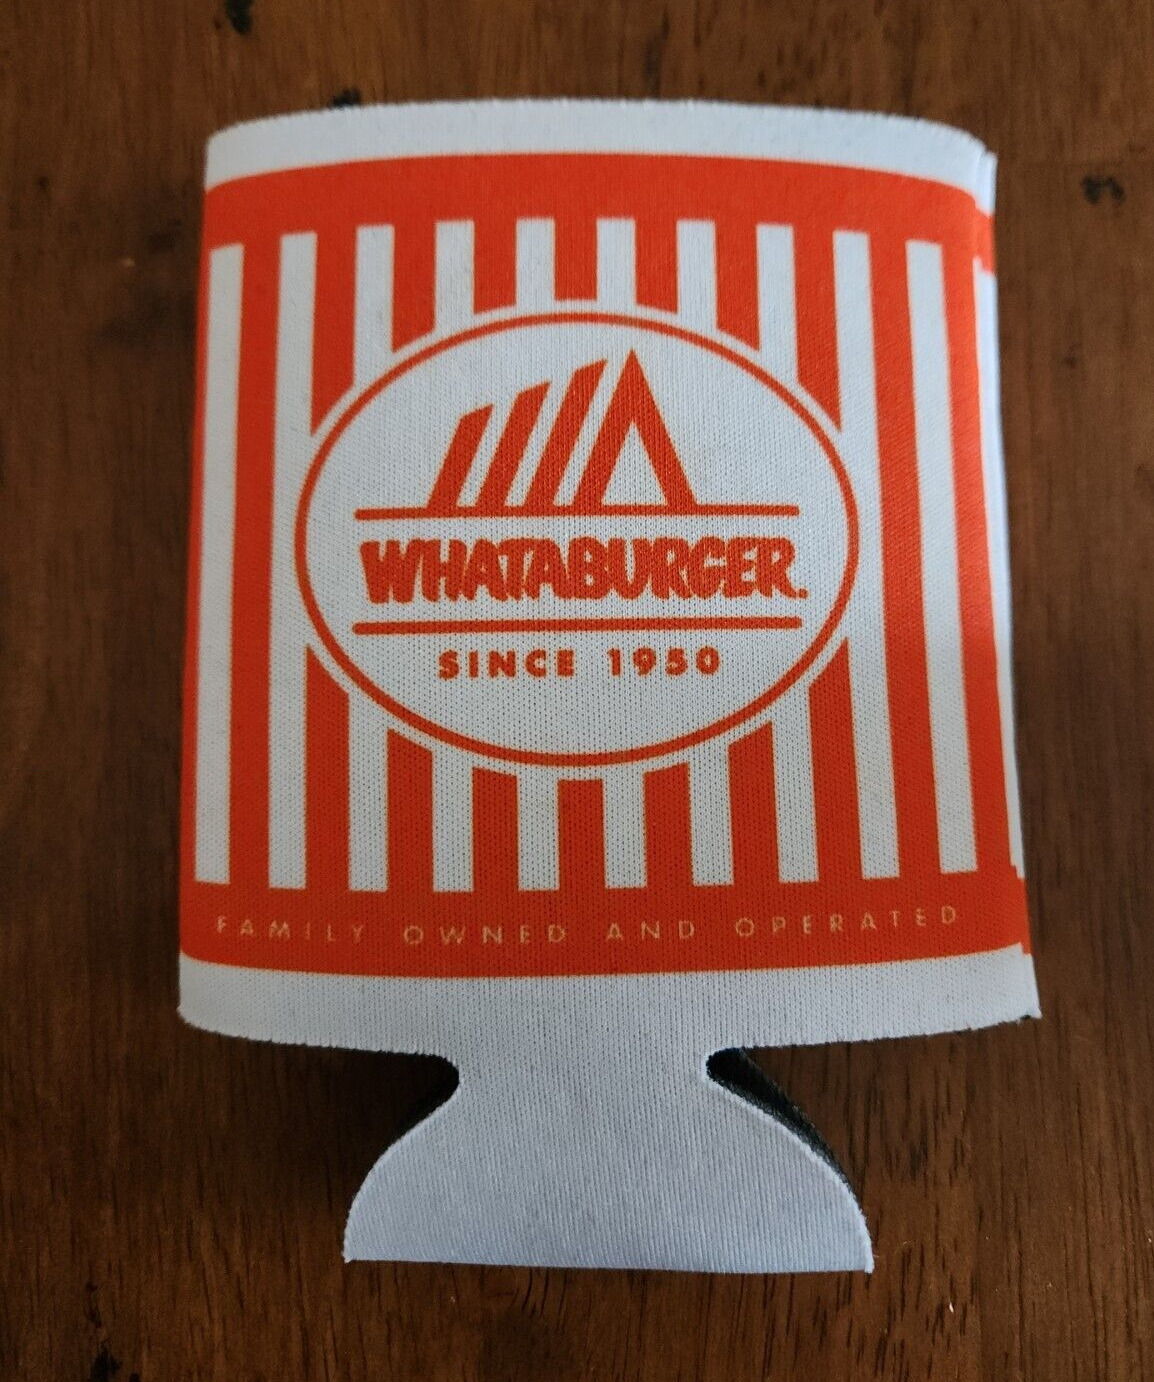 WHATABURGER Vintage Promotional Can Cooler Koozie Coozie NEW